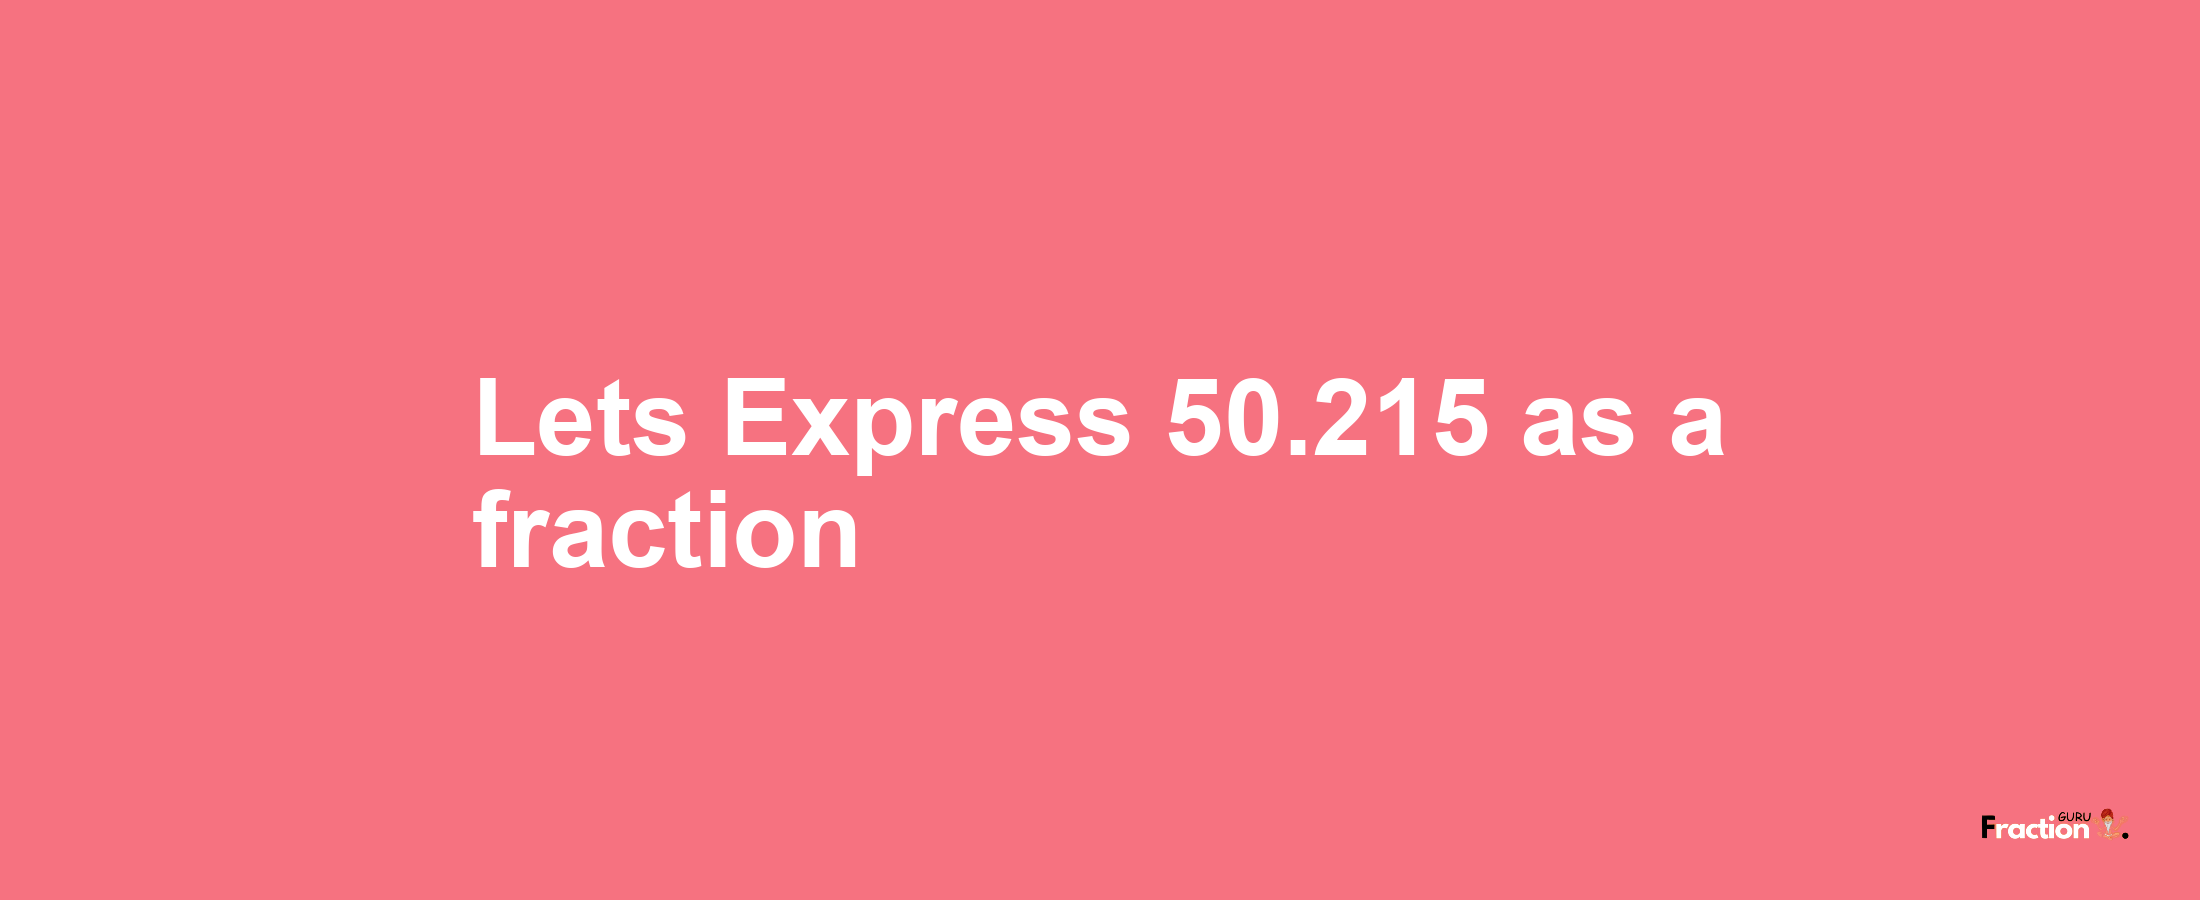 Lets Express 50.215 as afraction